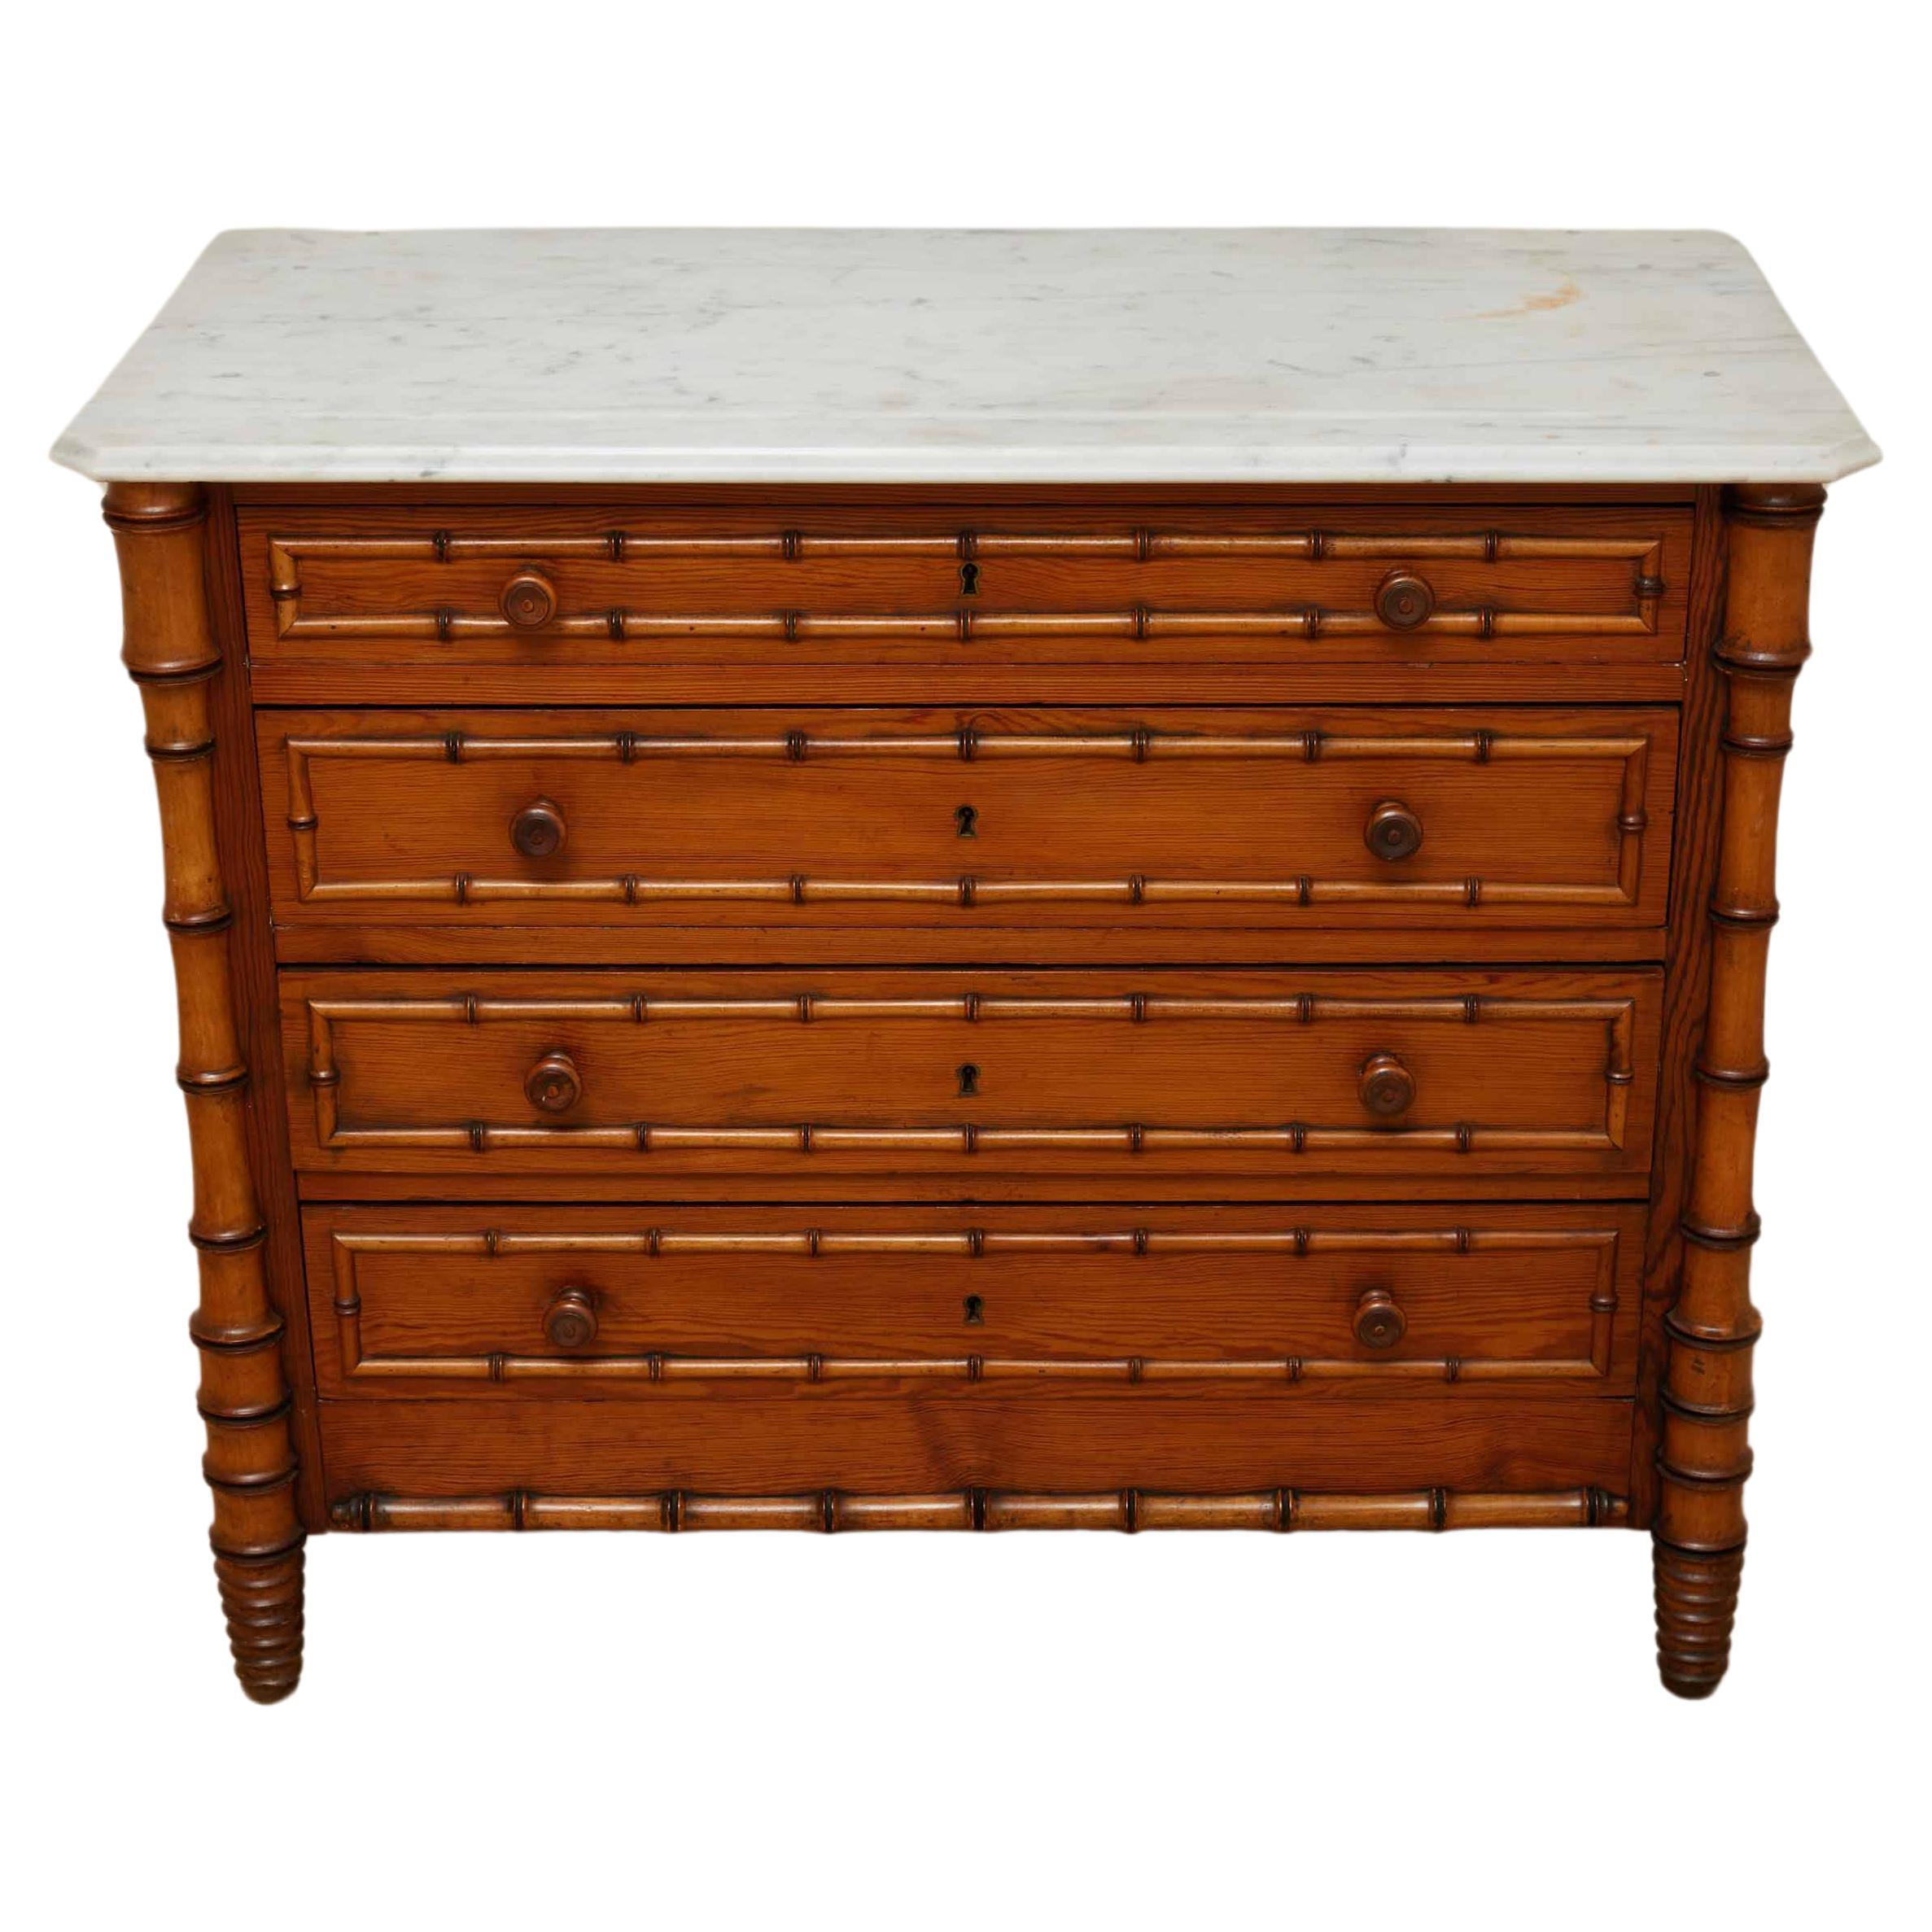 19th-C. French Faux Bamboo Pine & Marble Chest / Commode